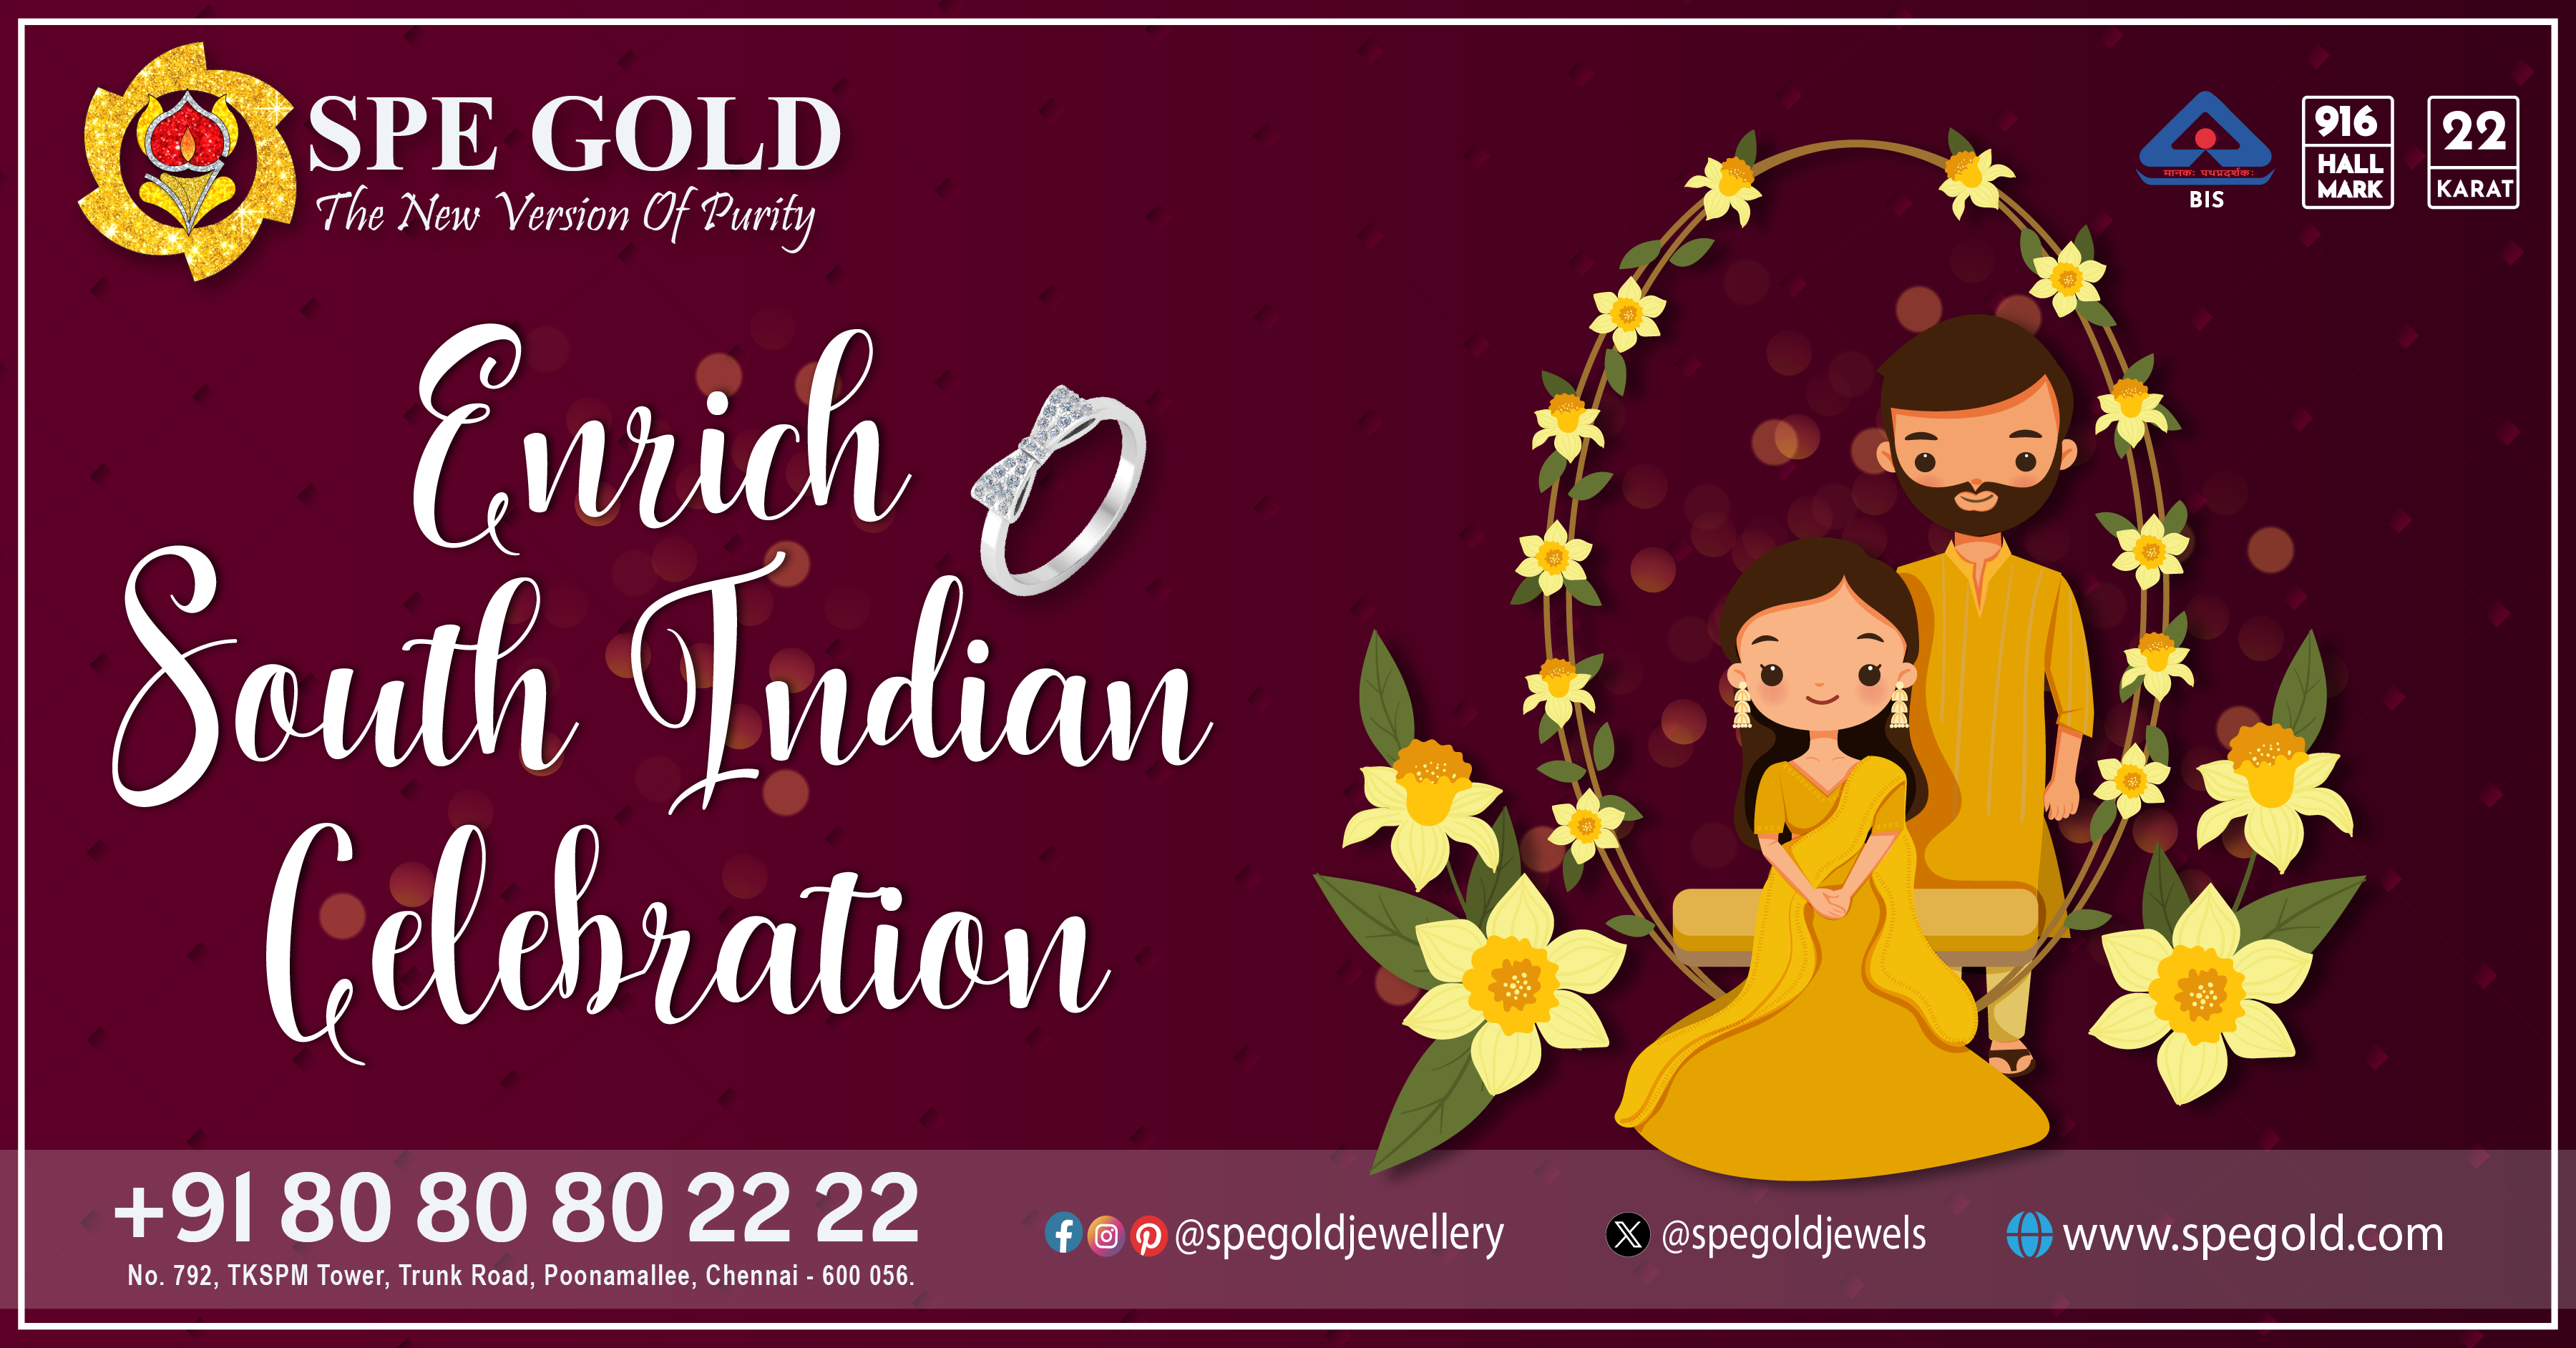 Enhance Your South Indian Wedding with SPE GOLD